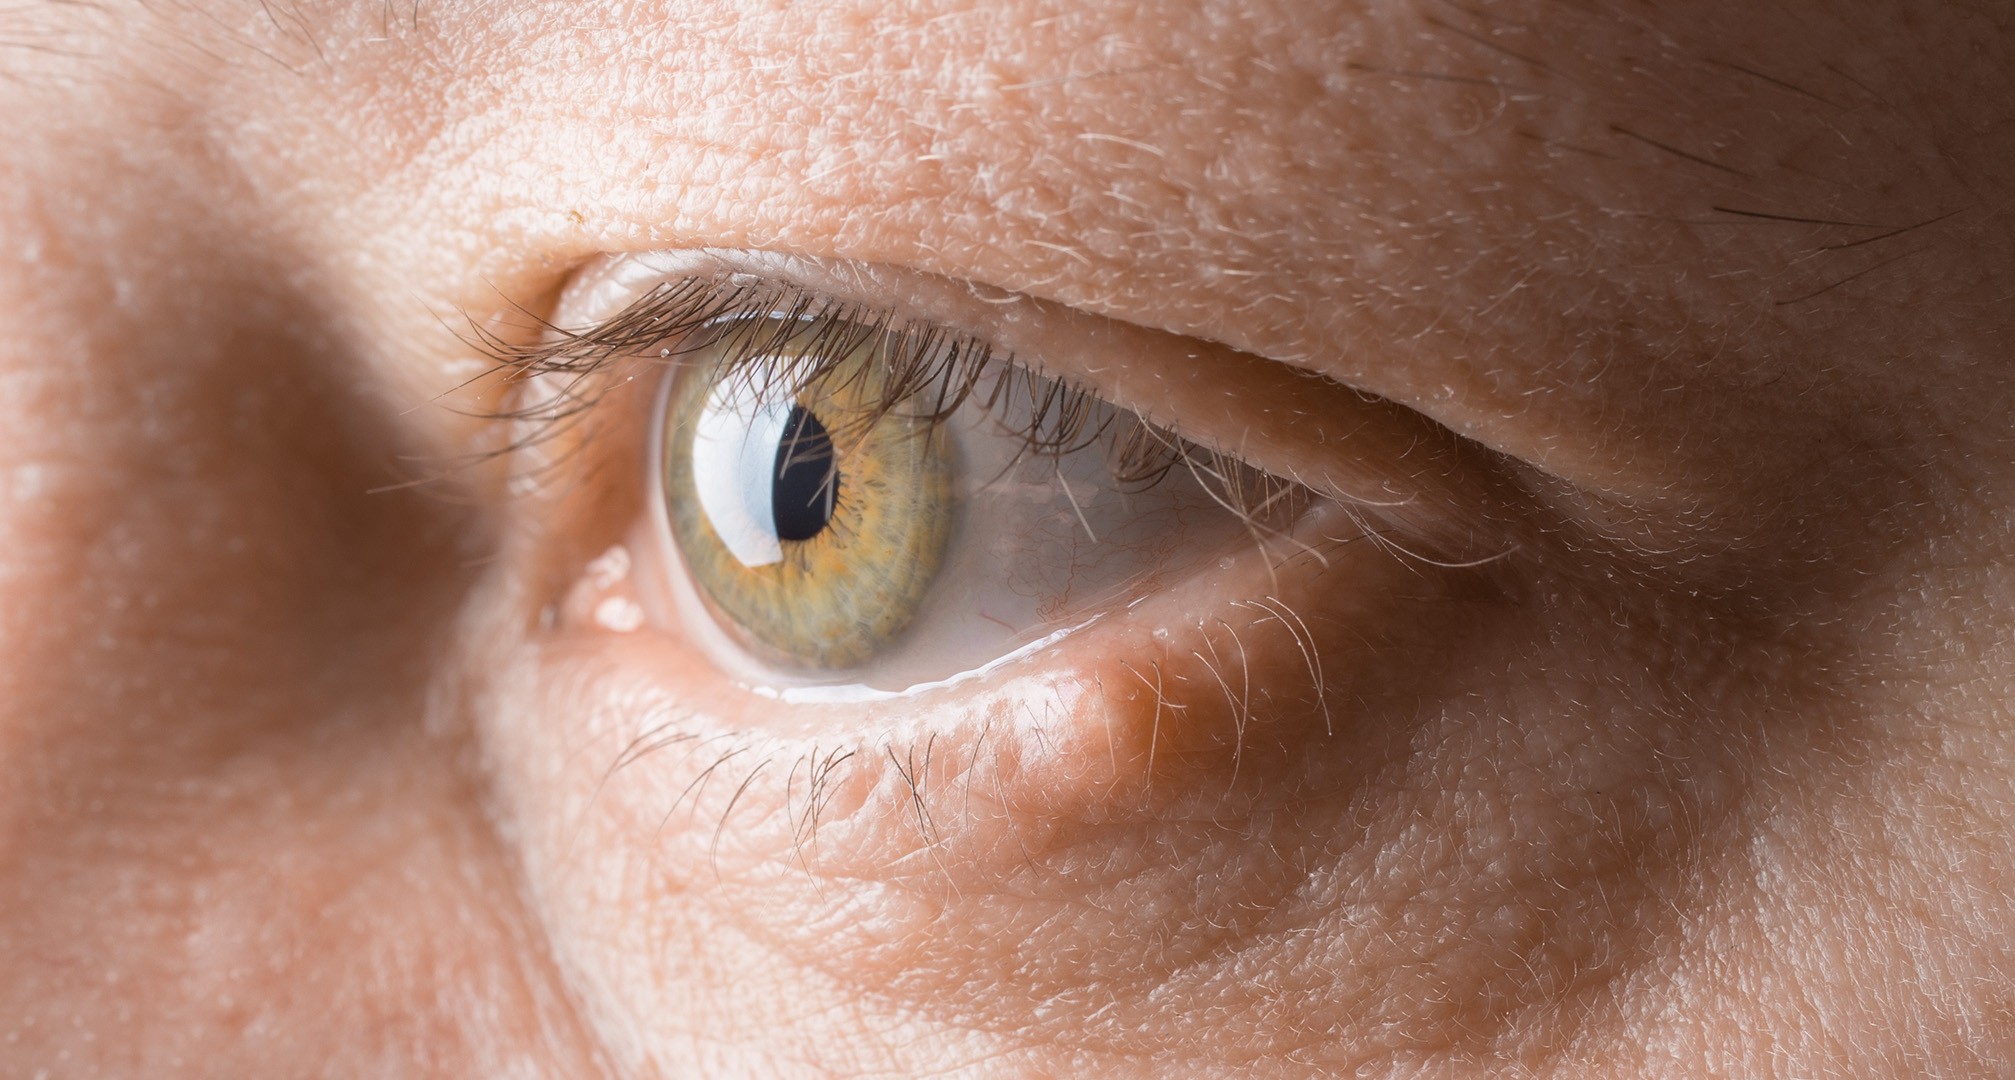 Eyelid cancer can manifest as a small nodule on the eyelid. Eyelid cancer itself doesn't affect vision, meaning your visual field will remain normal. If left untreated, however, the cancer can spread to the surrounding structures which can impact vision.